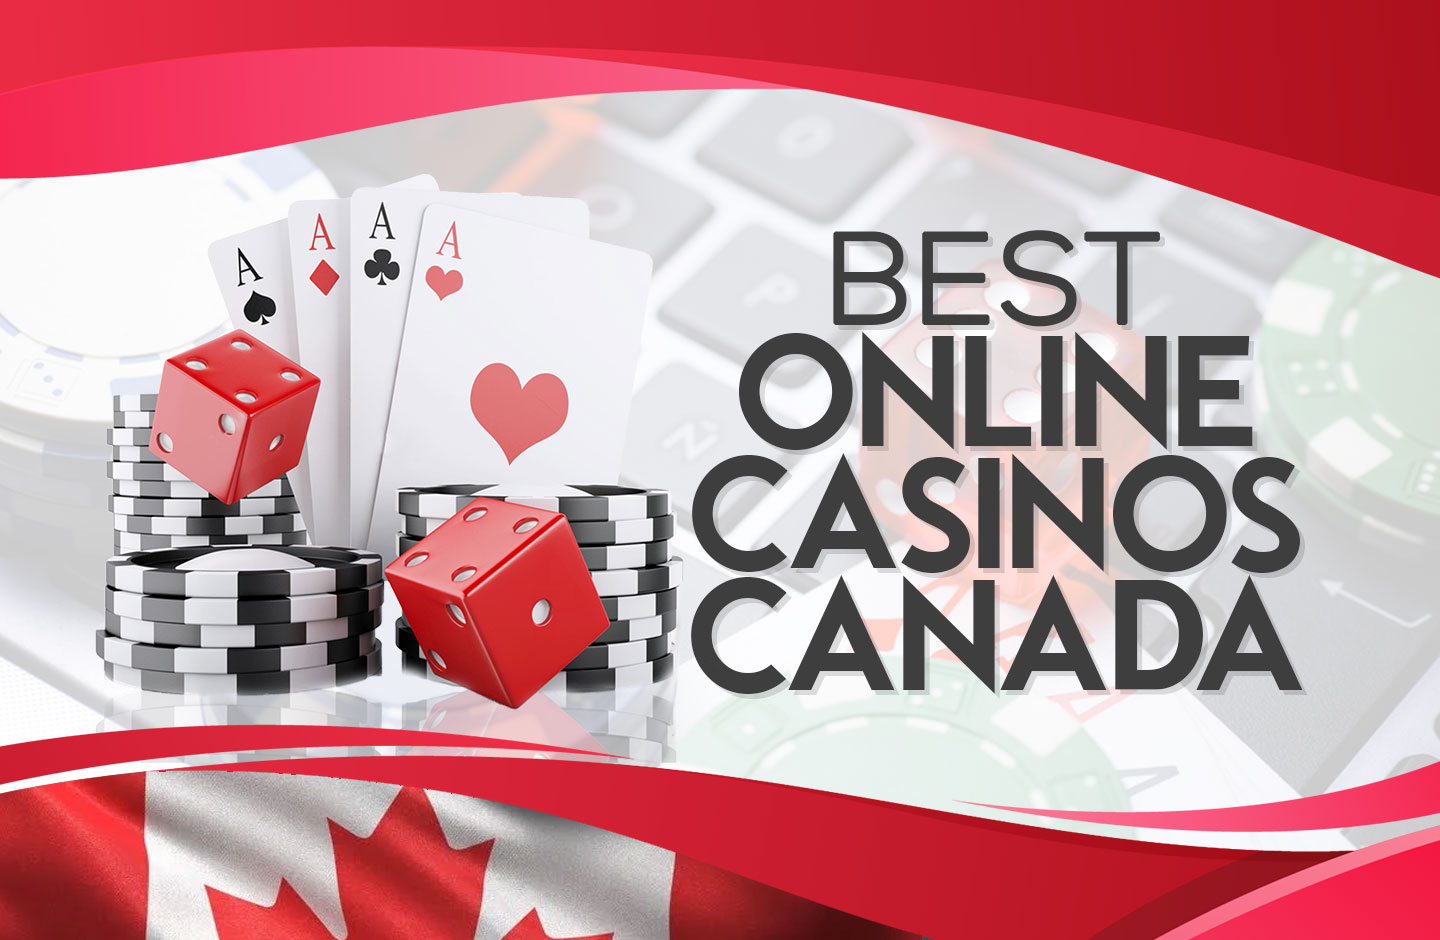 10 Facts Everyone Should Know About Online Casinos